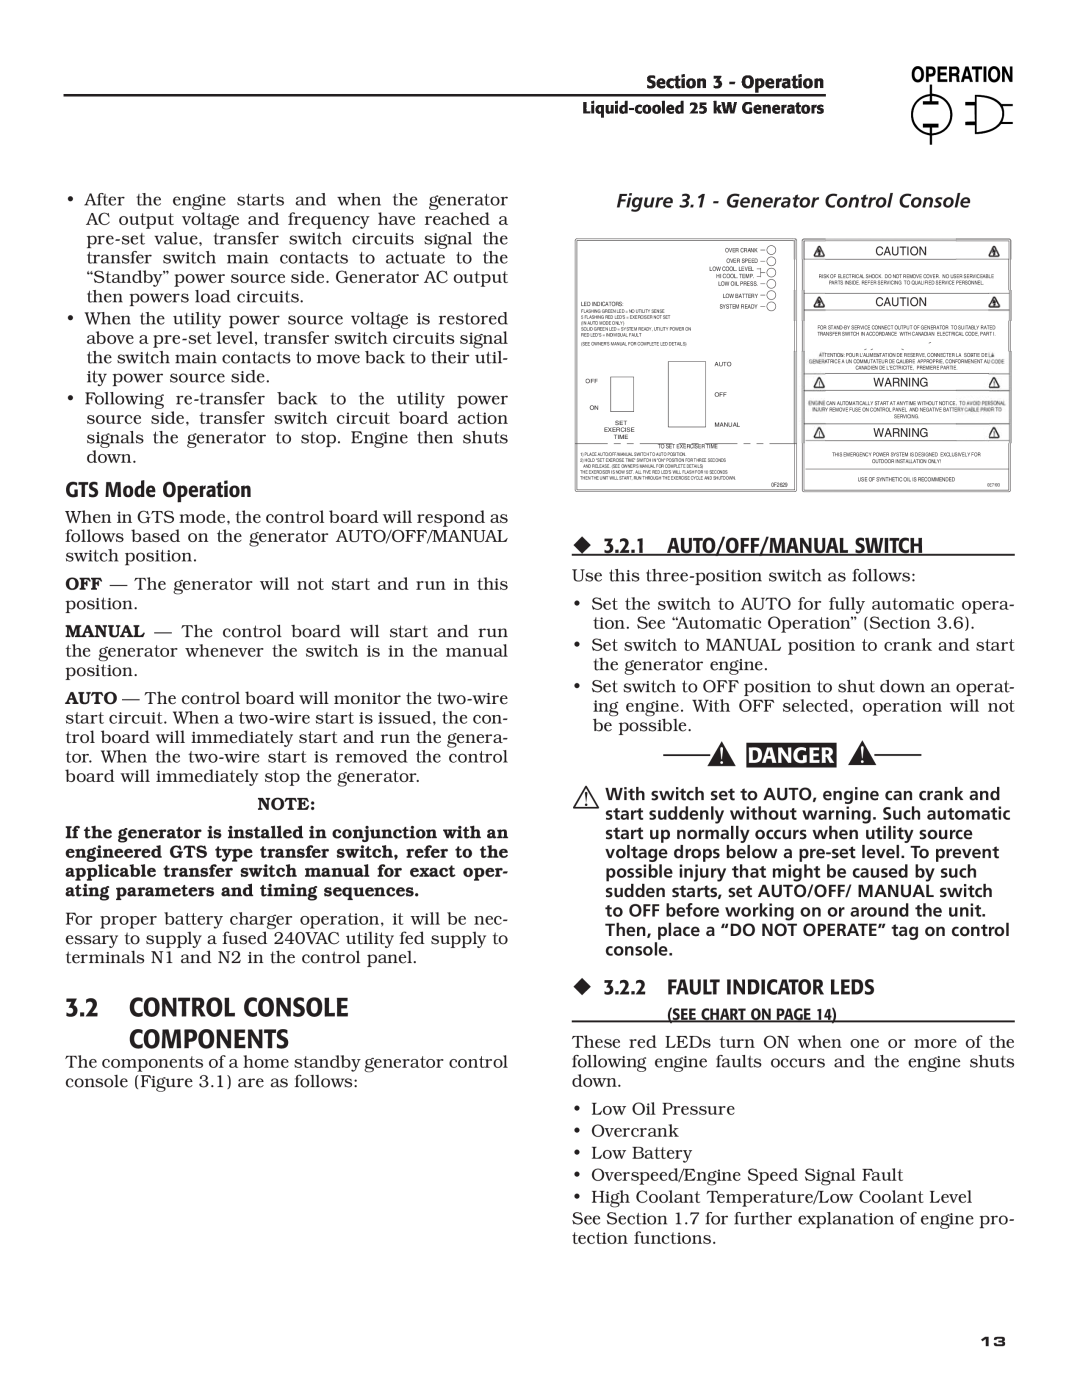 Generac 005031-2 owner manual 3.2CONTROL CONSOLE COMPONENTS, GTS Mode Operation, ‹3.2.1 AUTO/OFF/MANUAL SWITCH, Danger 